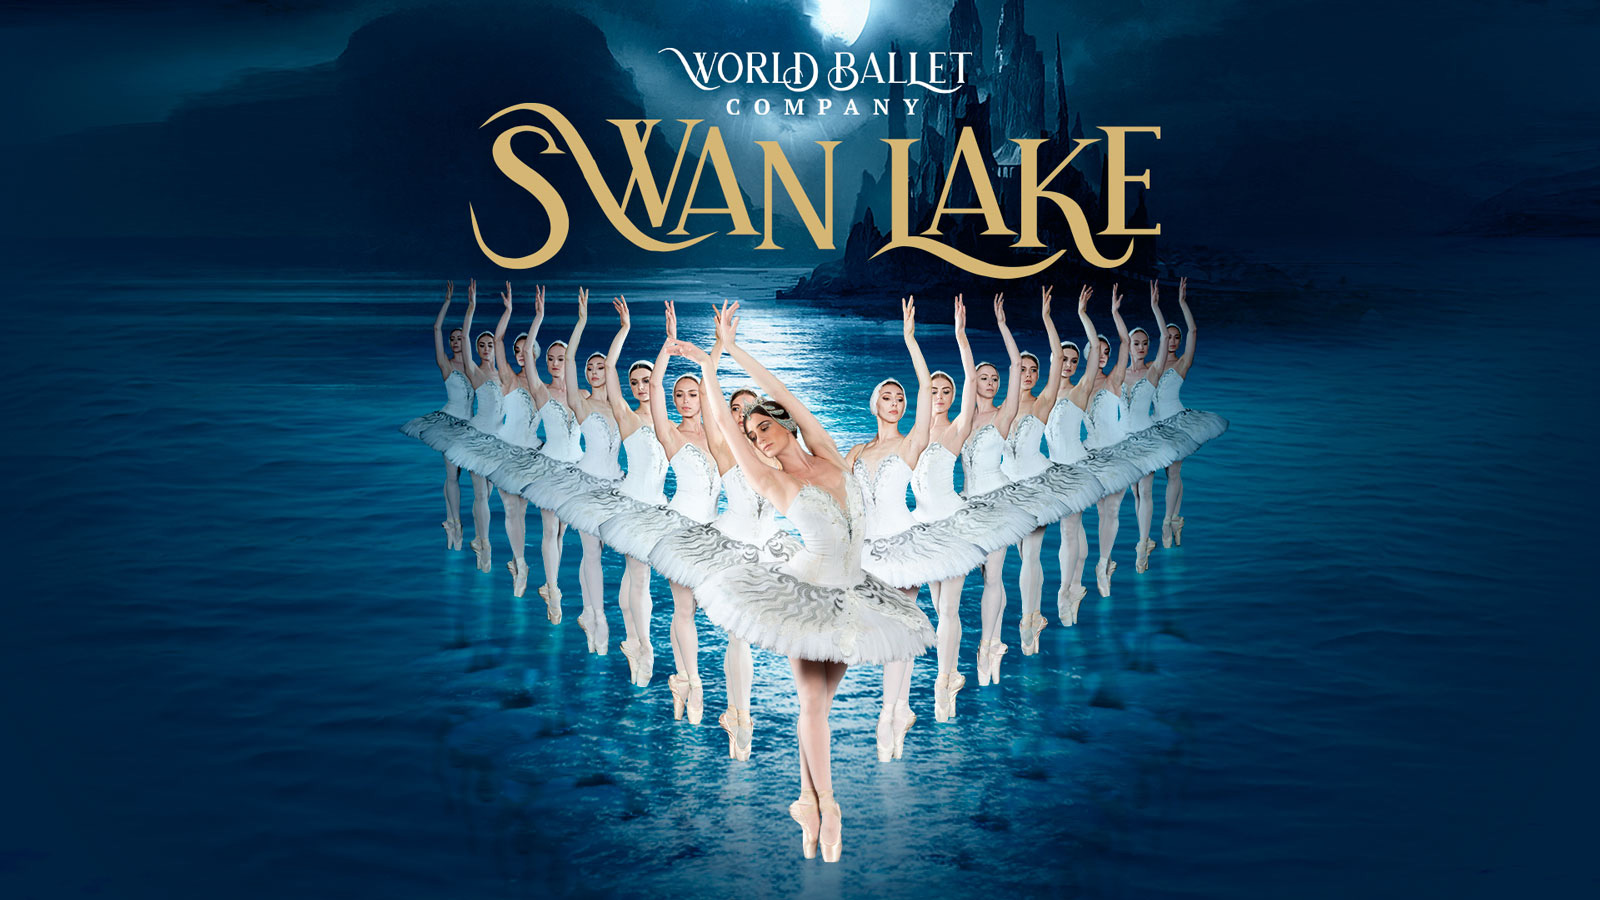 A line of ballet dancers standing on point with World Ballet Company Swan Lake text